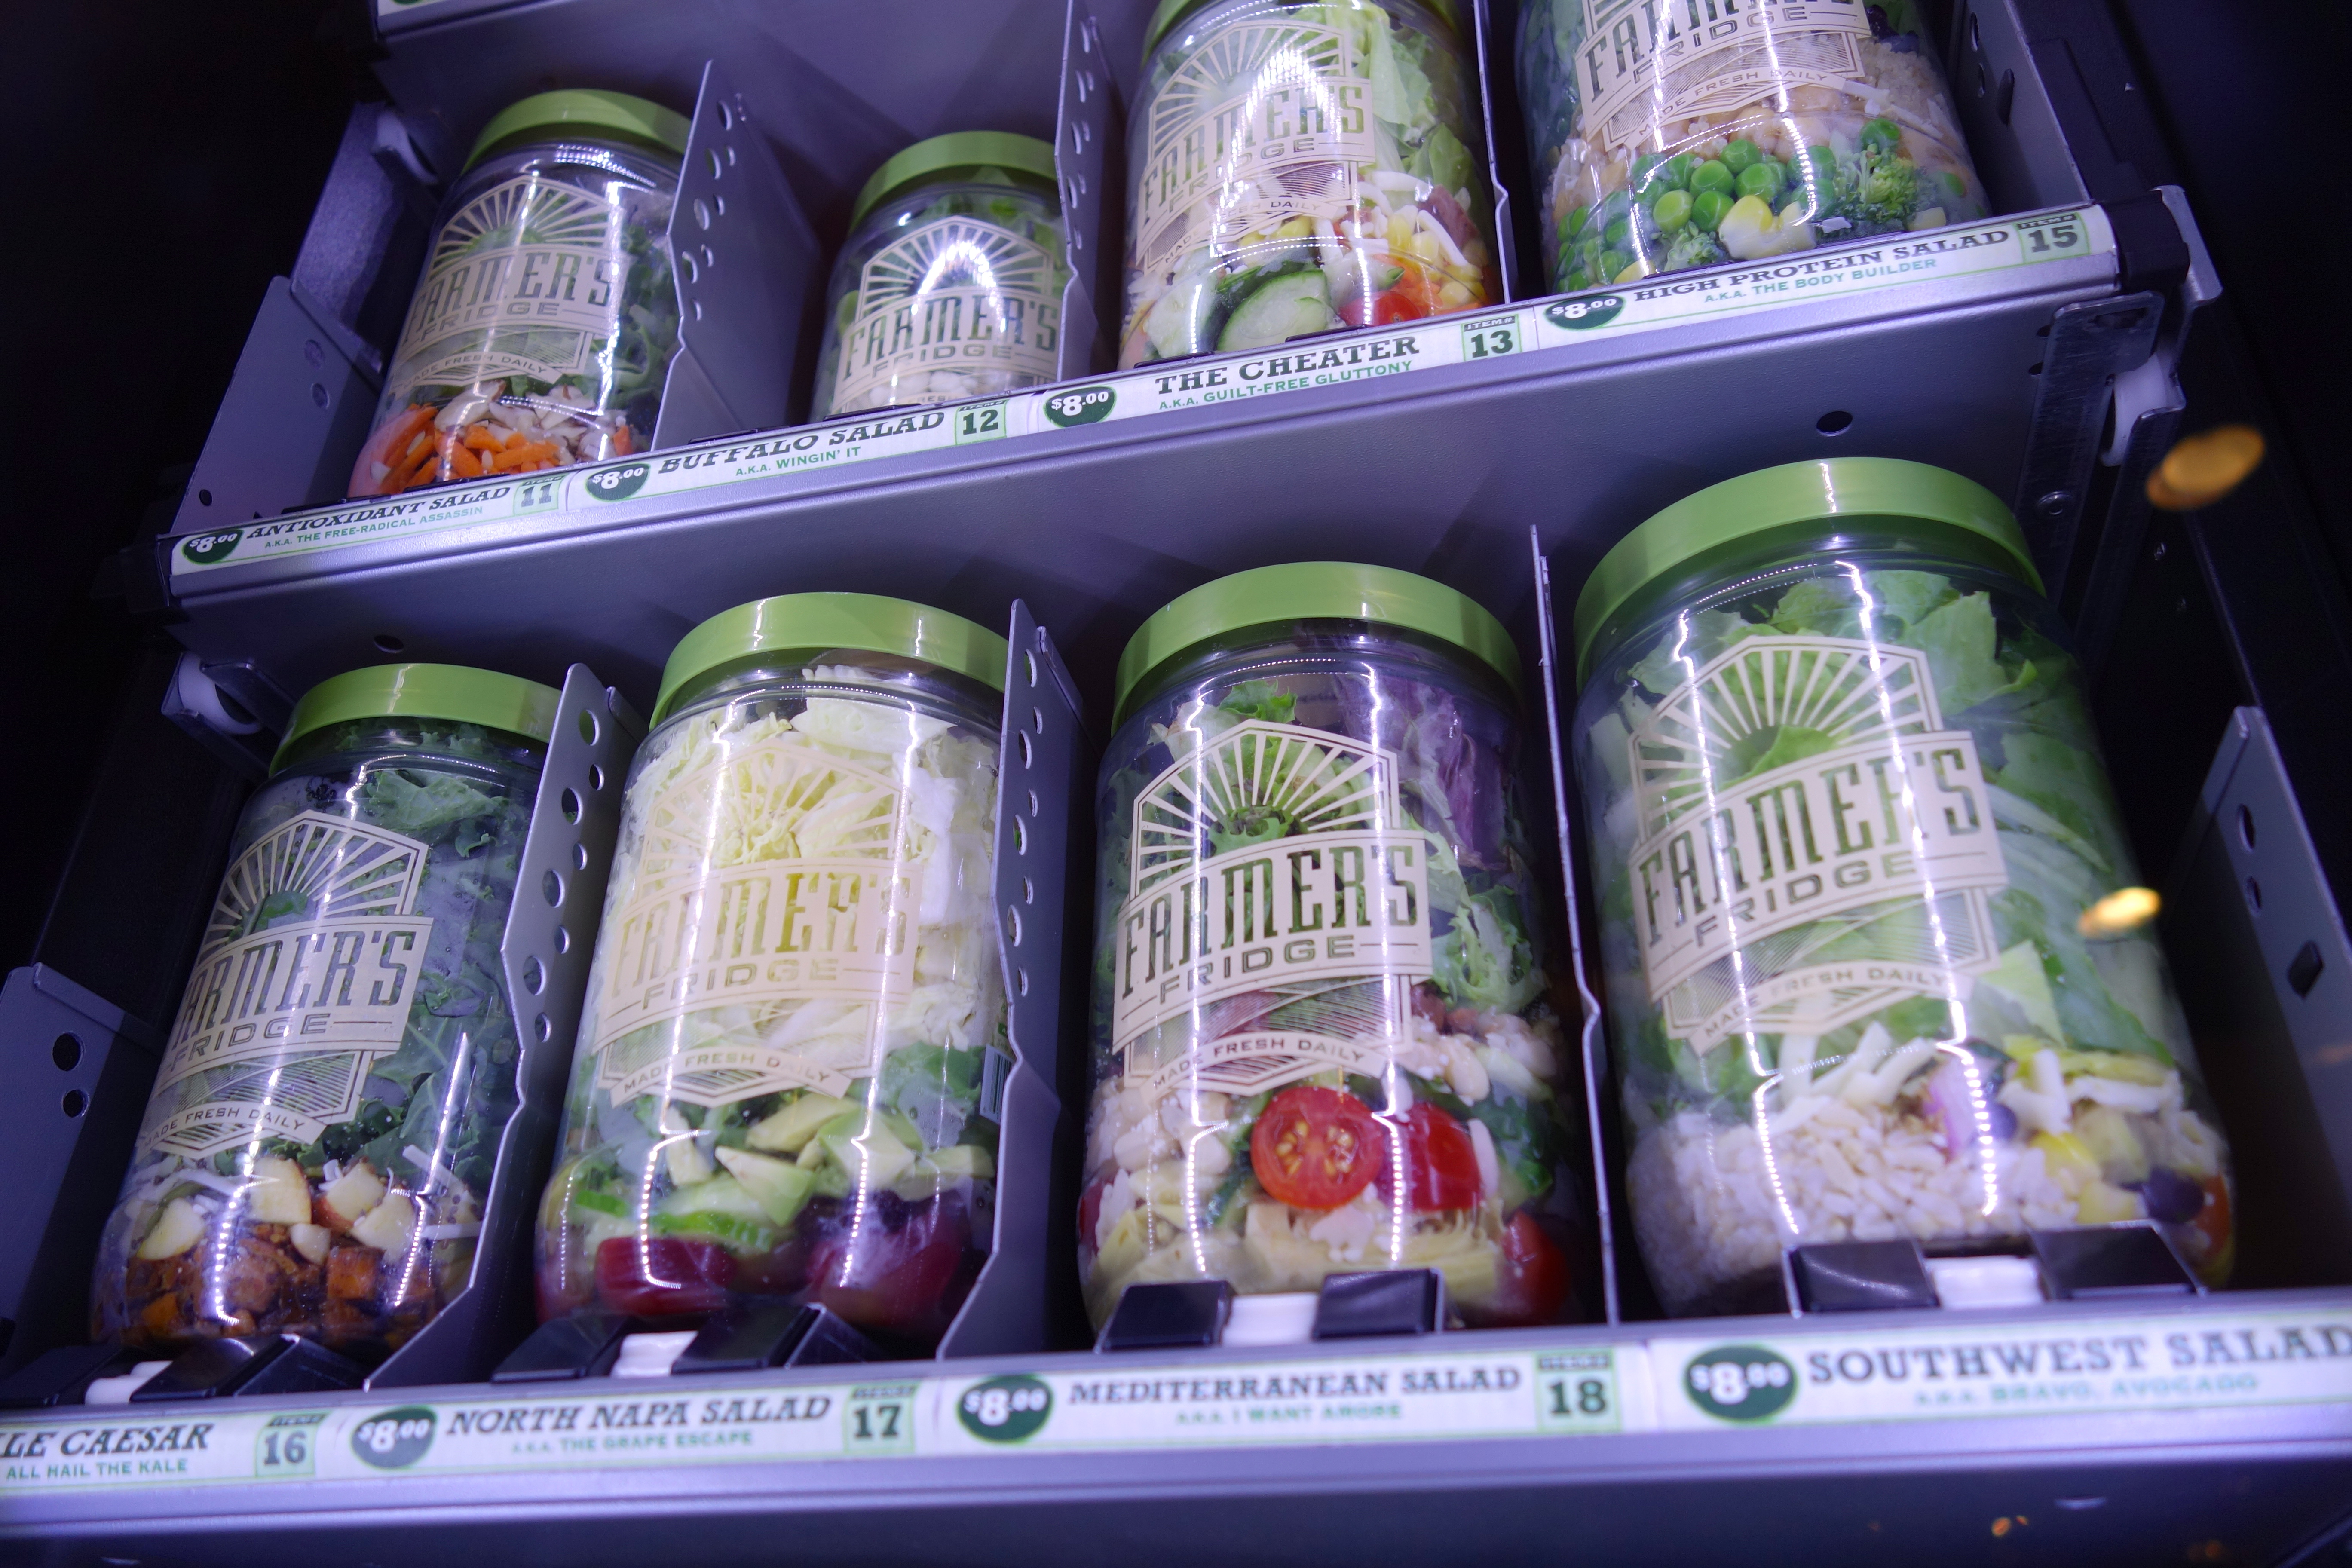 Lunch from Marriott’s New Healthy Vending Machine